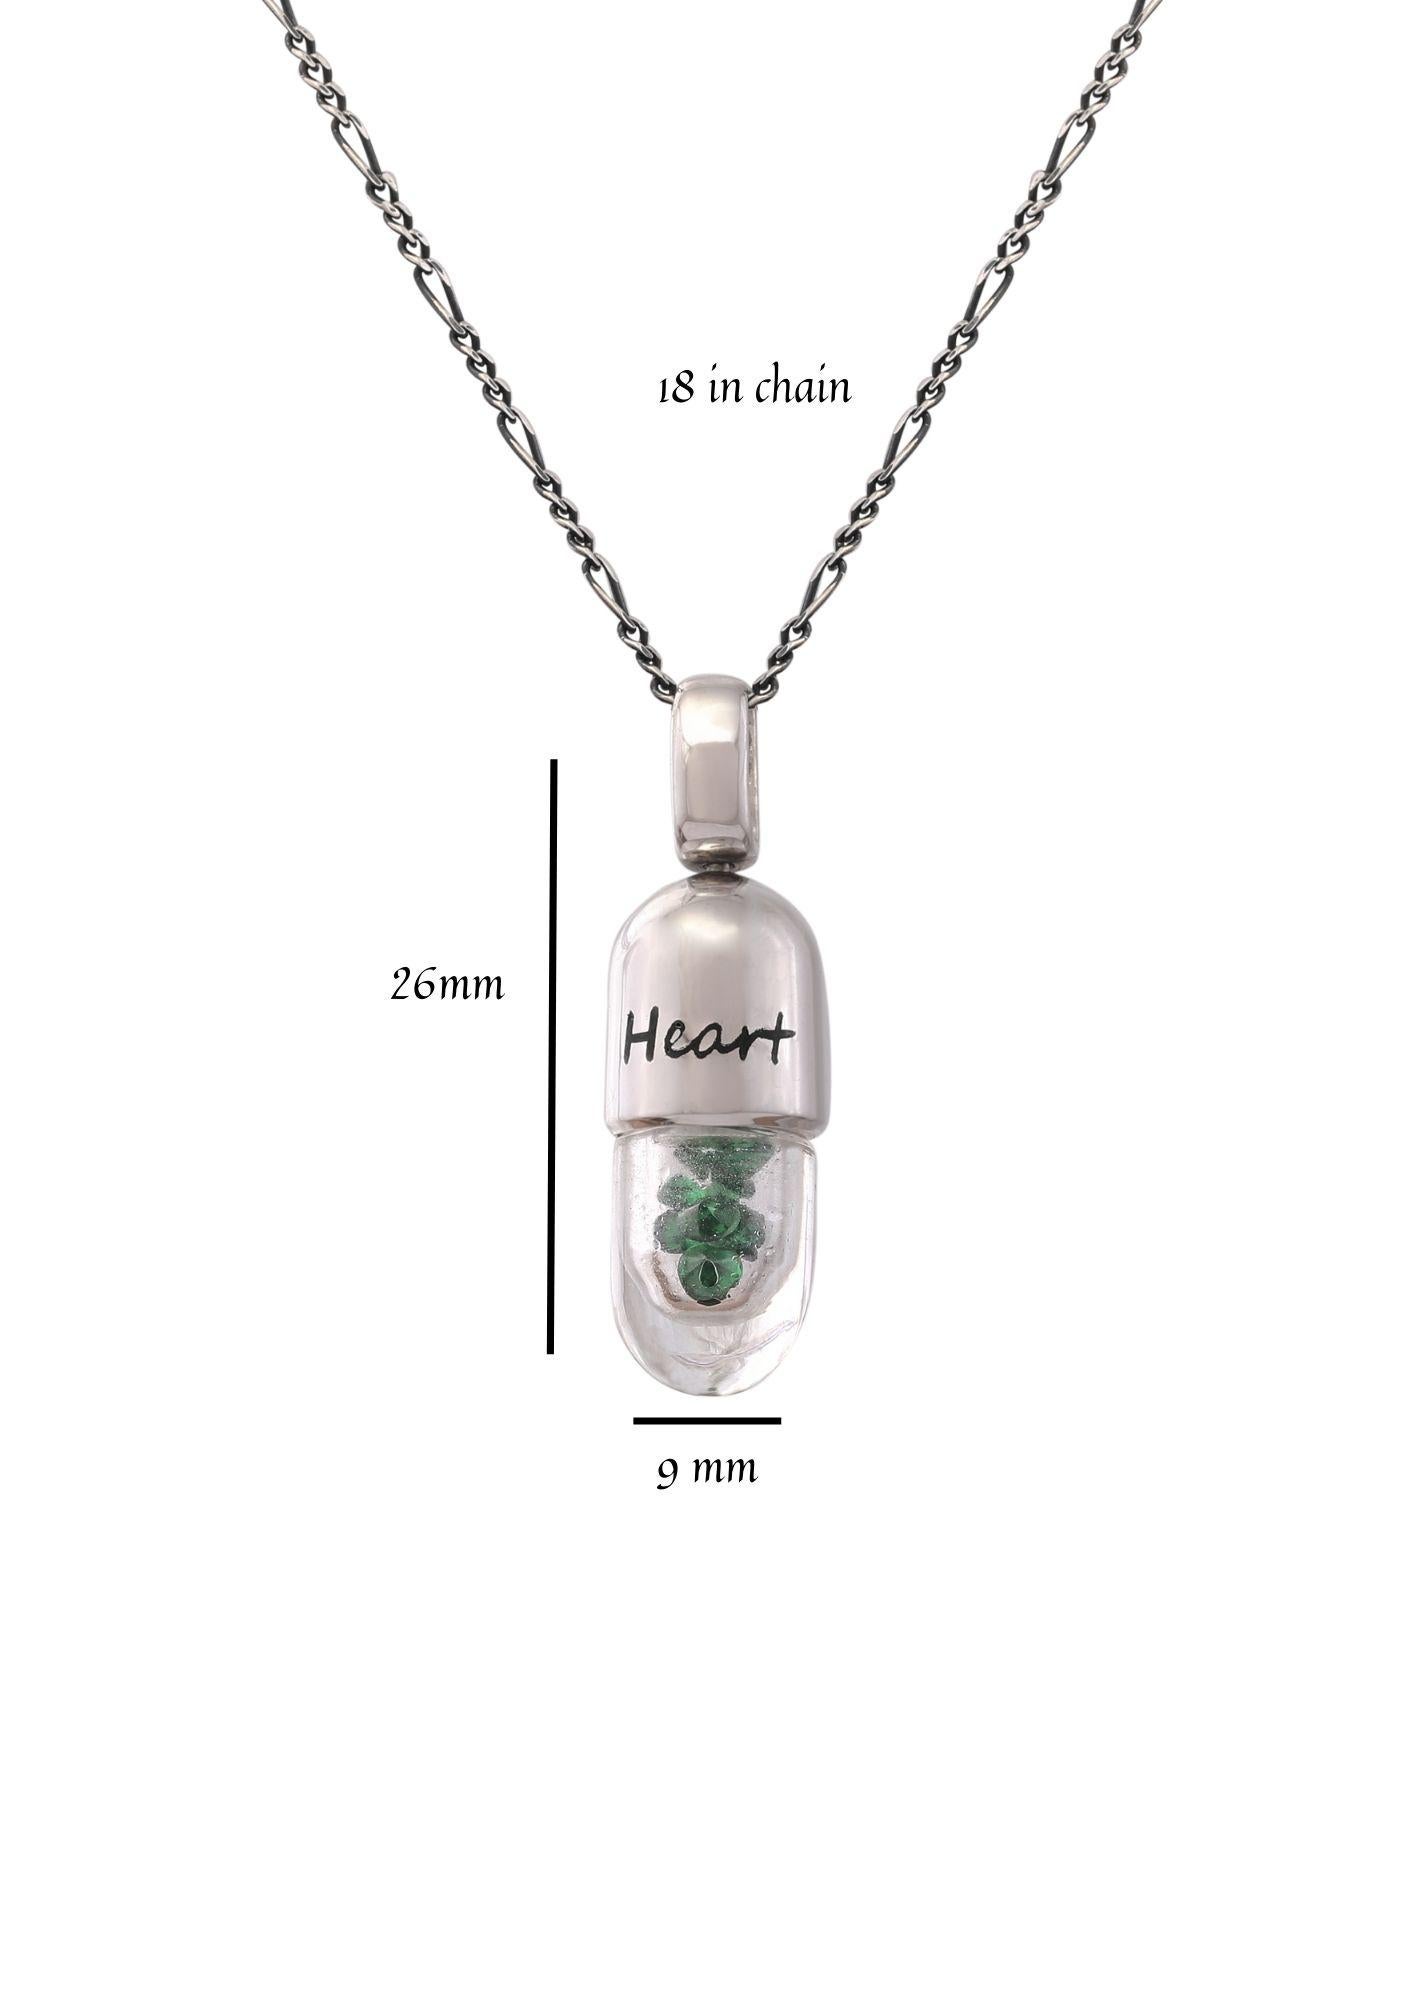 The Fourth Chakra or the Heart Chakra is the home of Unconditional Love. The Heart Chakra is associated with Color Green. 

Each Heart Chakra Pendant is handcrafted in Sterling Silver, specially Capsule cut Crystal Quartz and filled with Tsavorite.